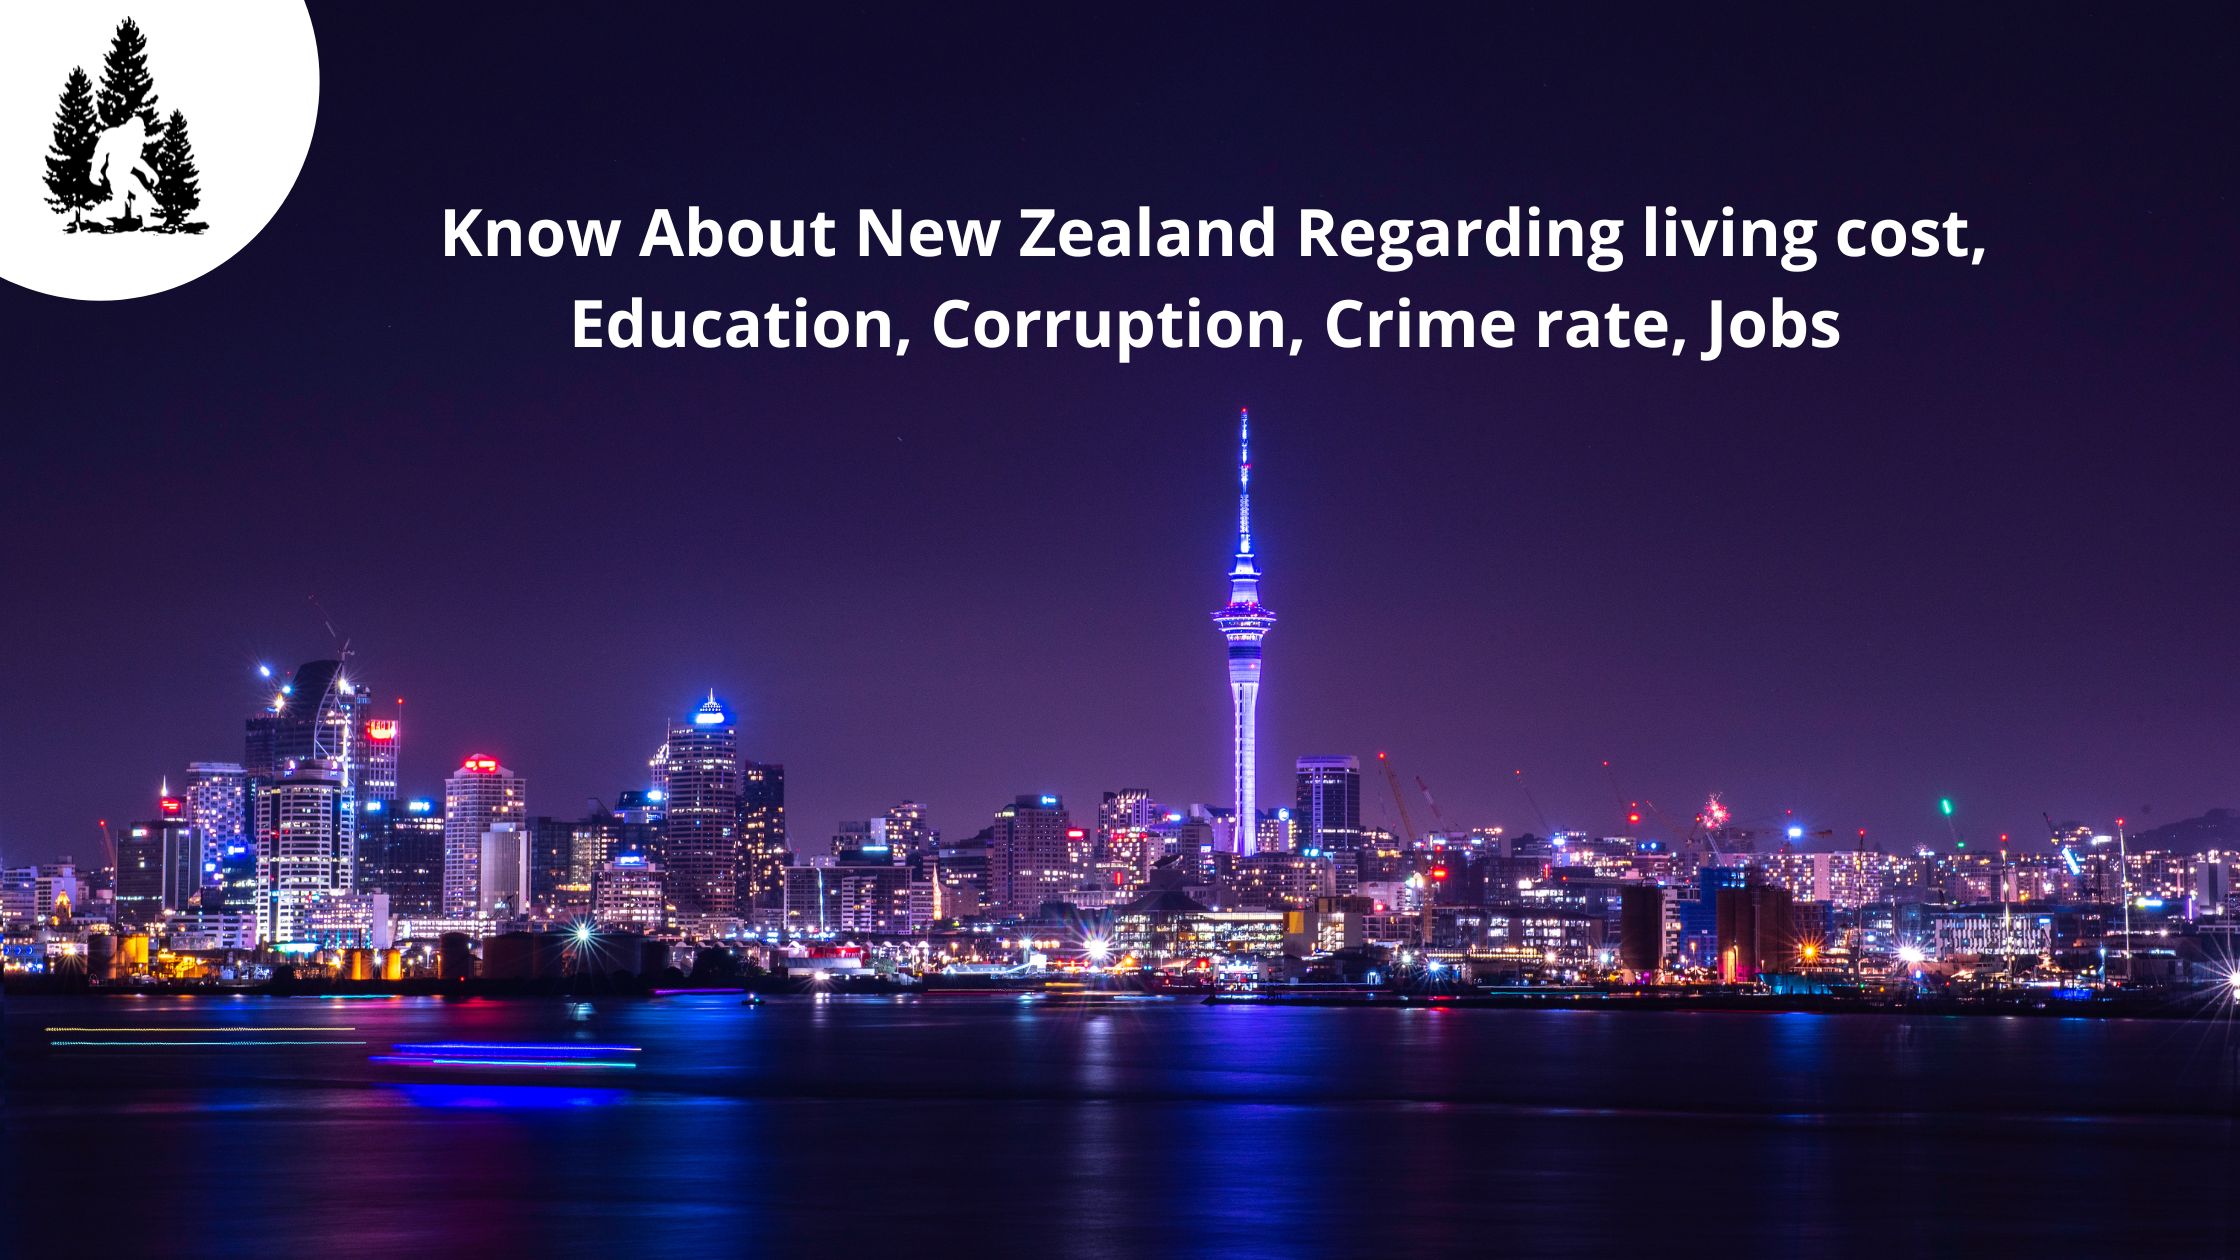 Know About New Zealand Regarding living cost, Education, Corruption, Crime rate, Jobs